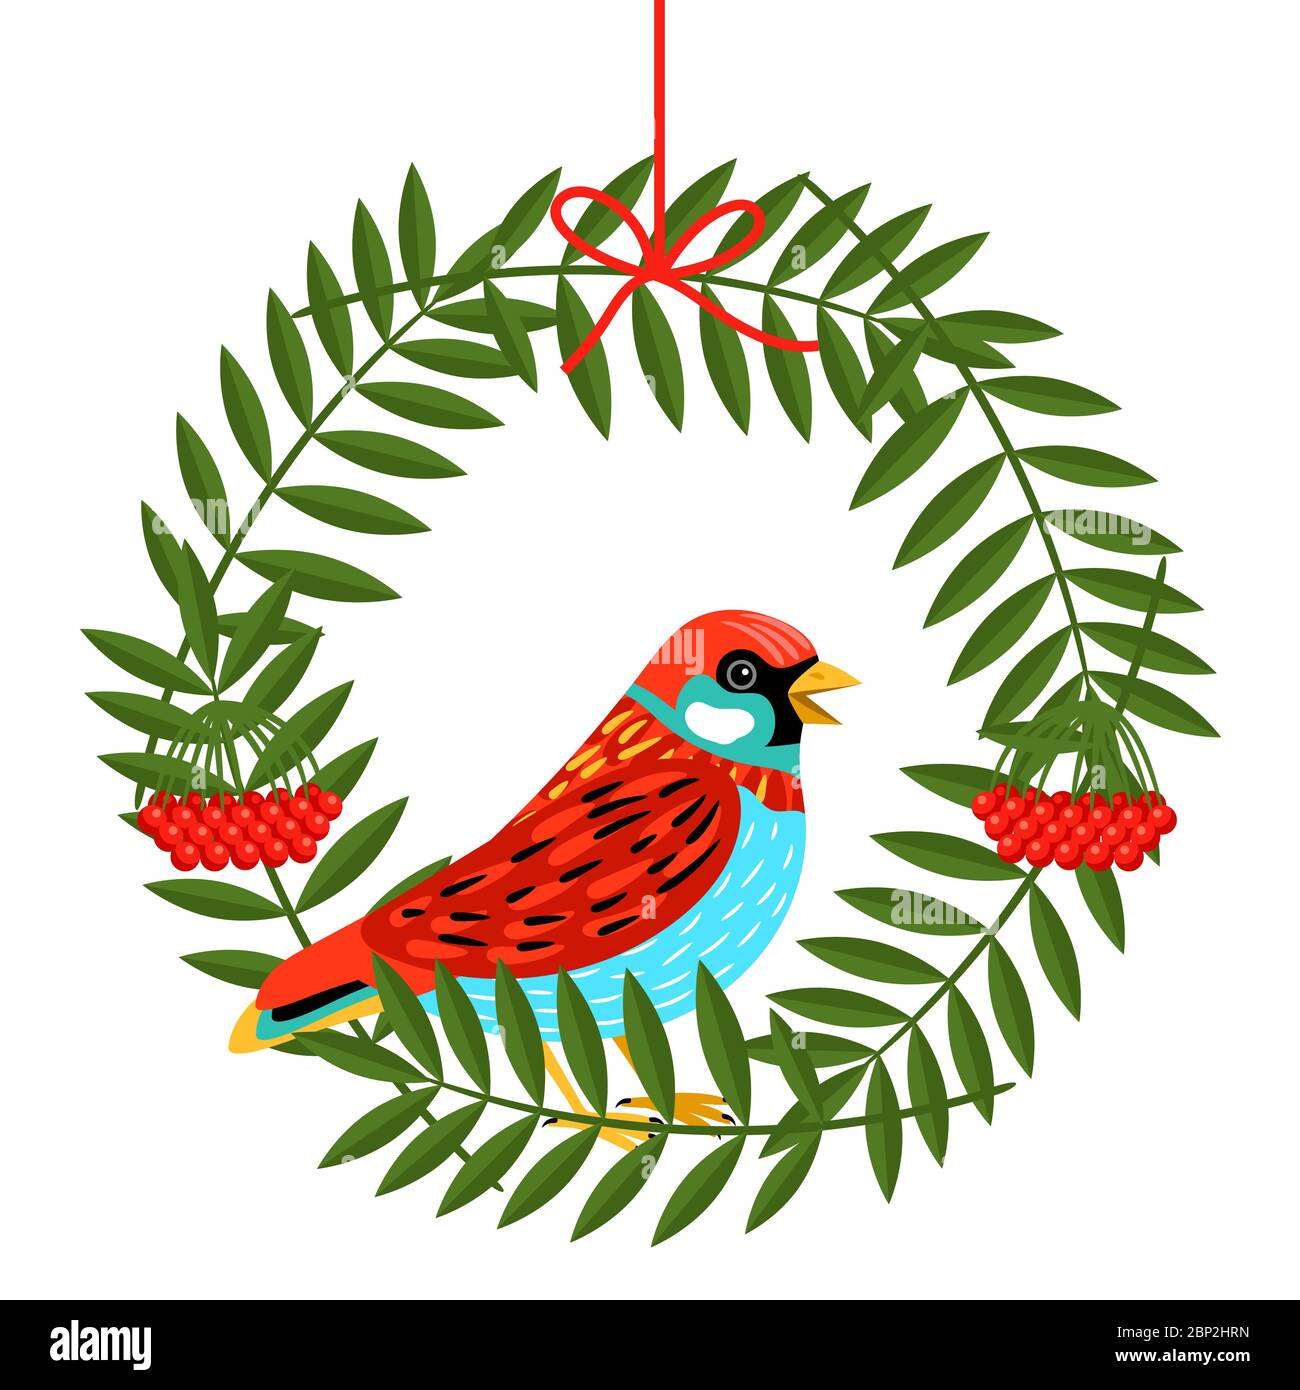 Colorful cartoon bird with rowan berries and leaves wreath vector illustration Stock Vector